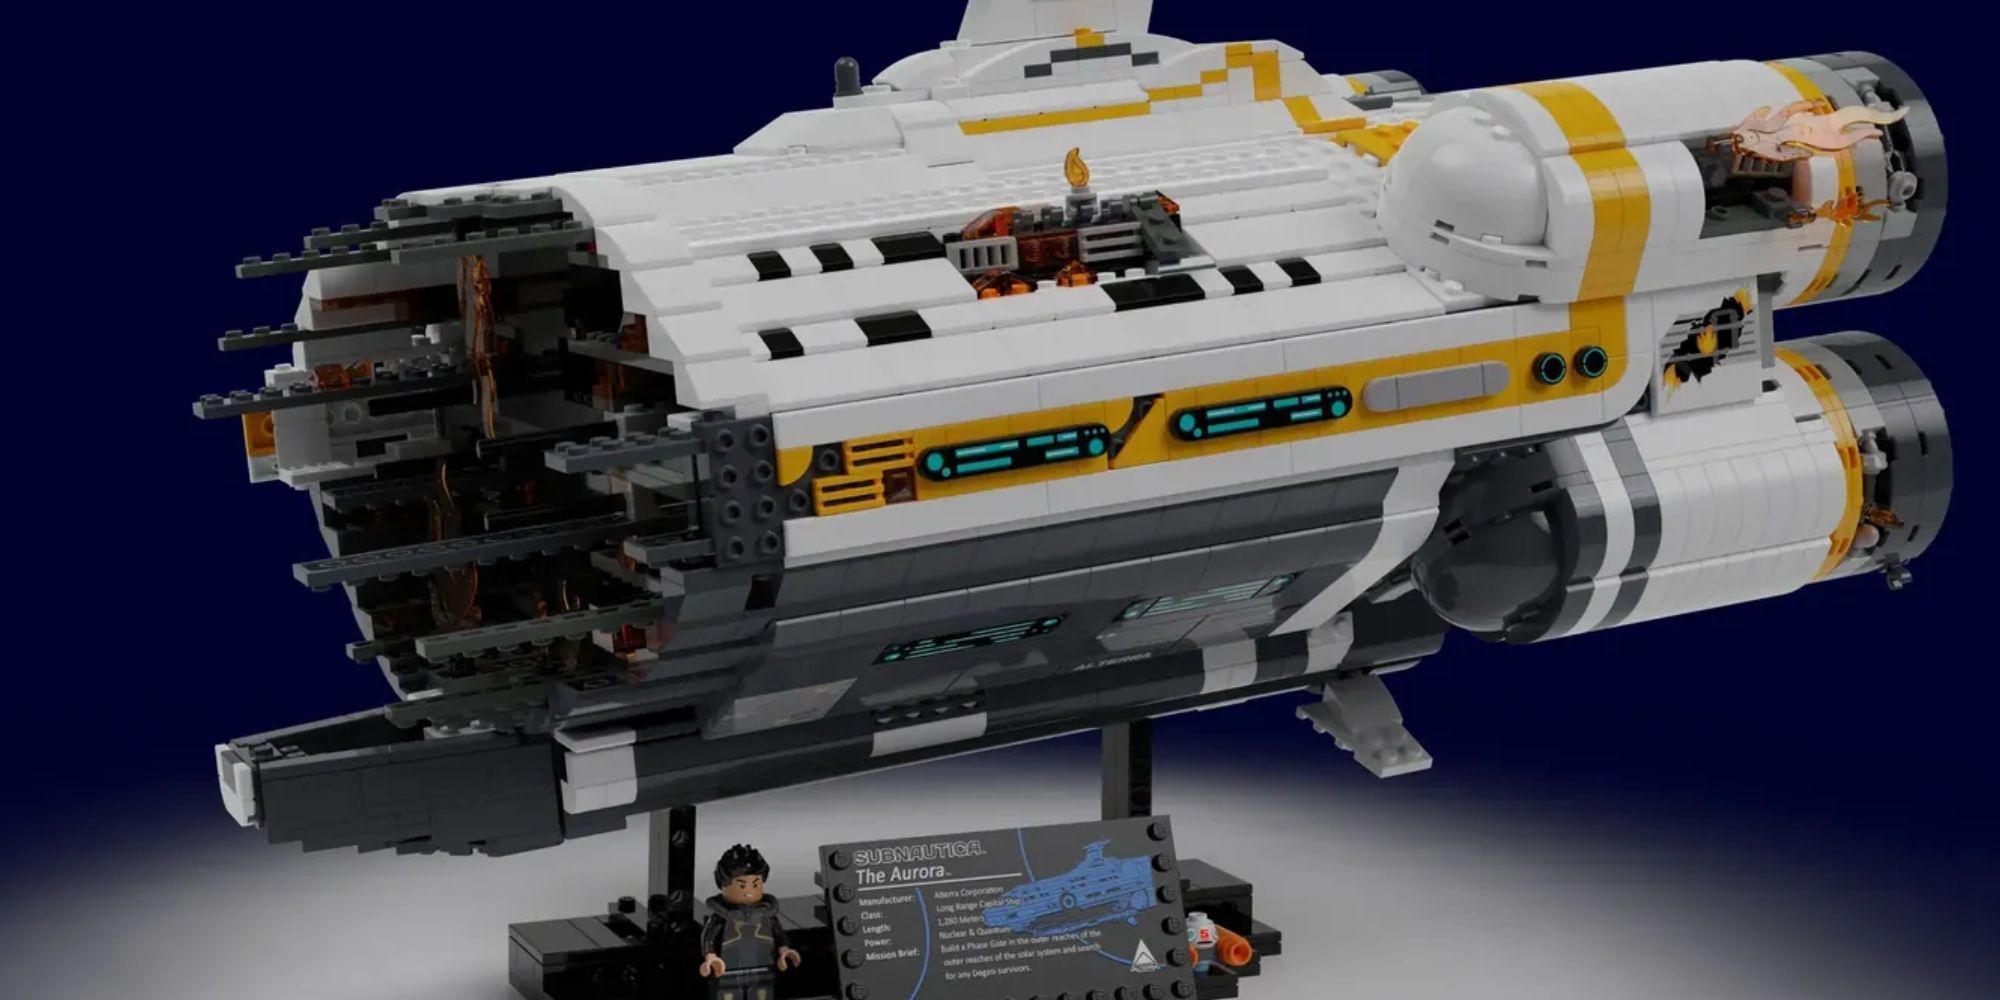 A proposed Lego set of The Aurora from Subnautica